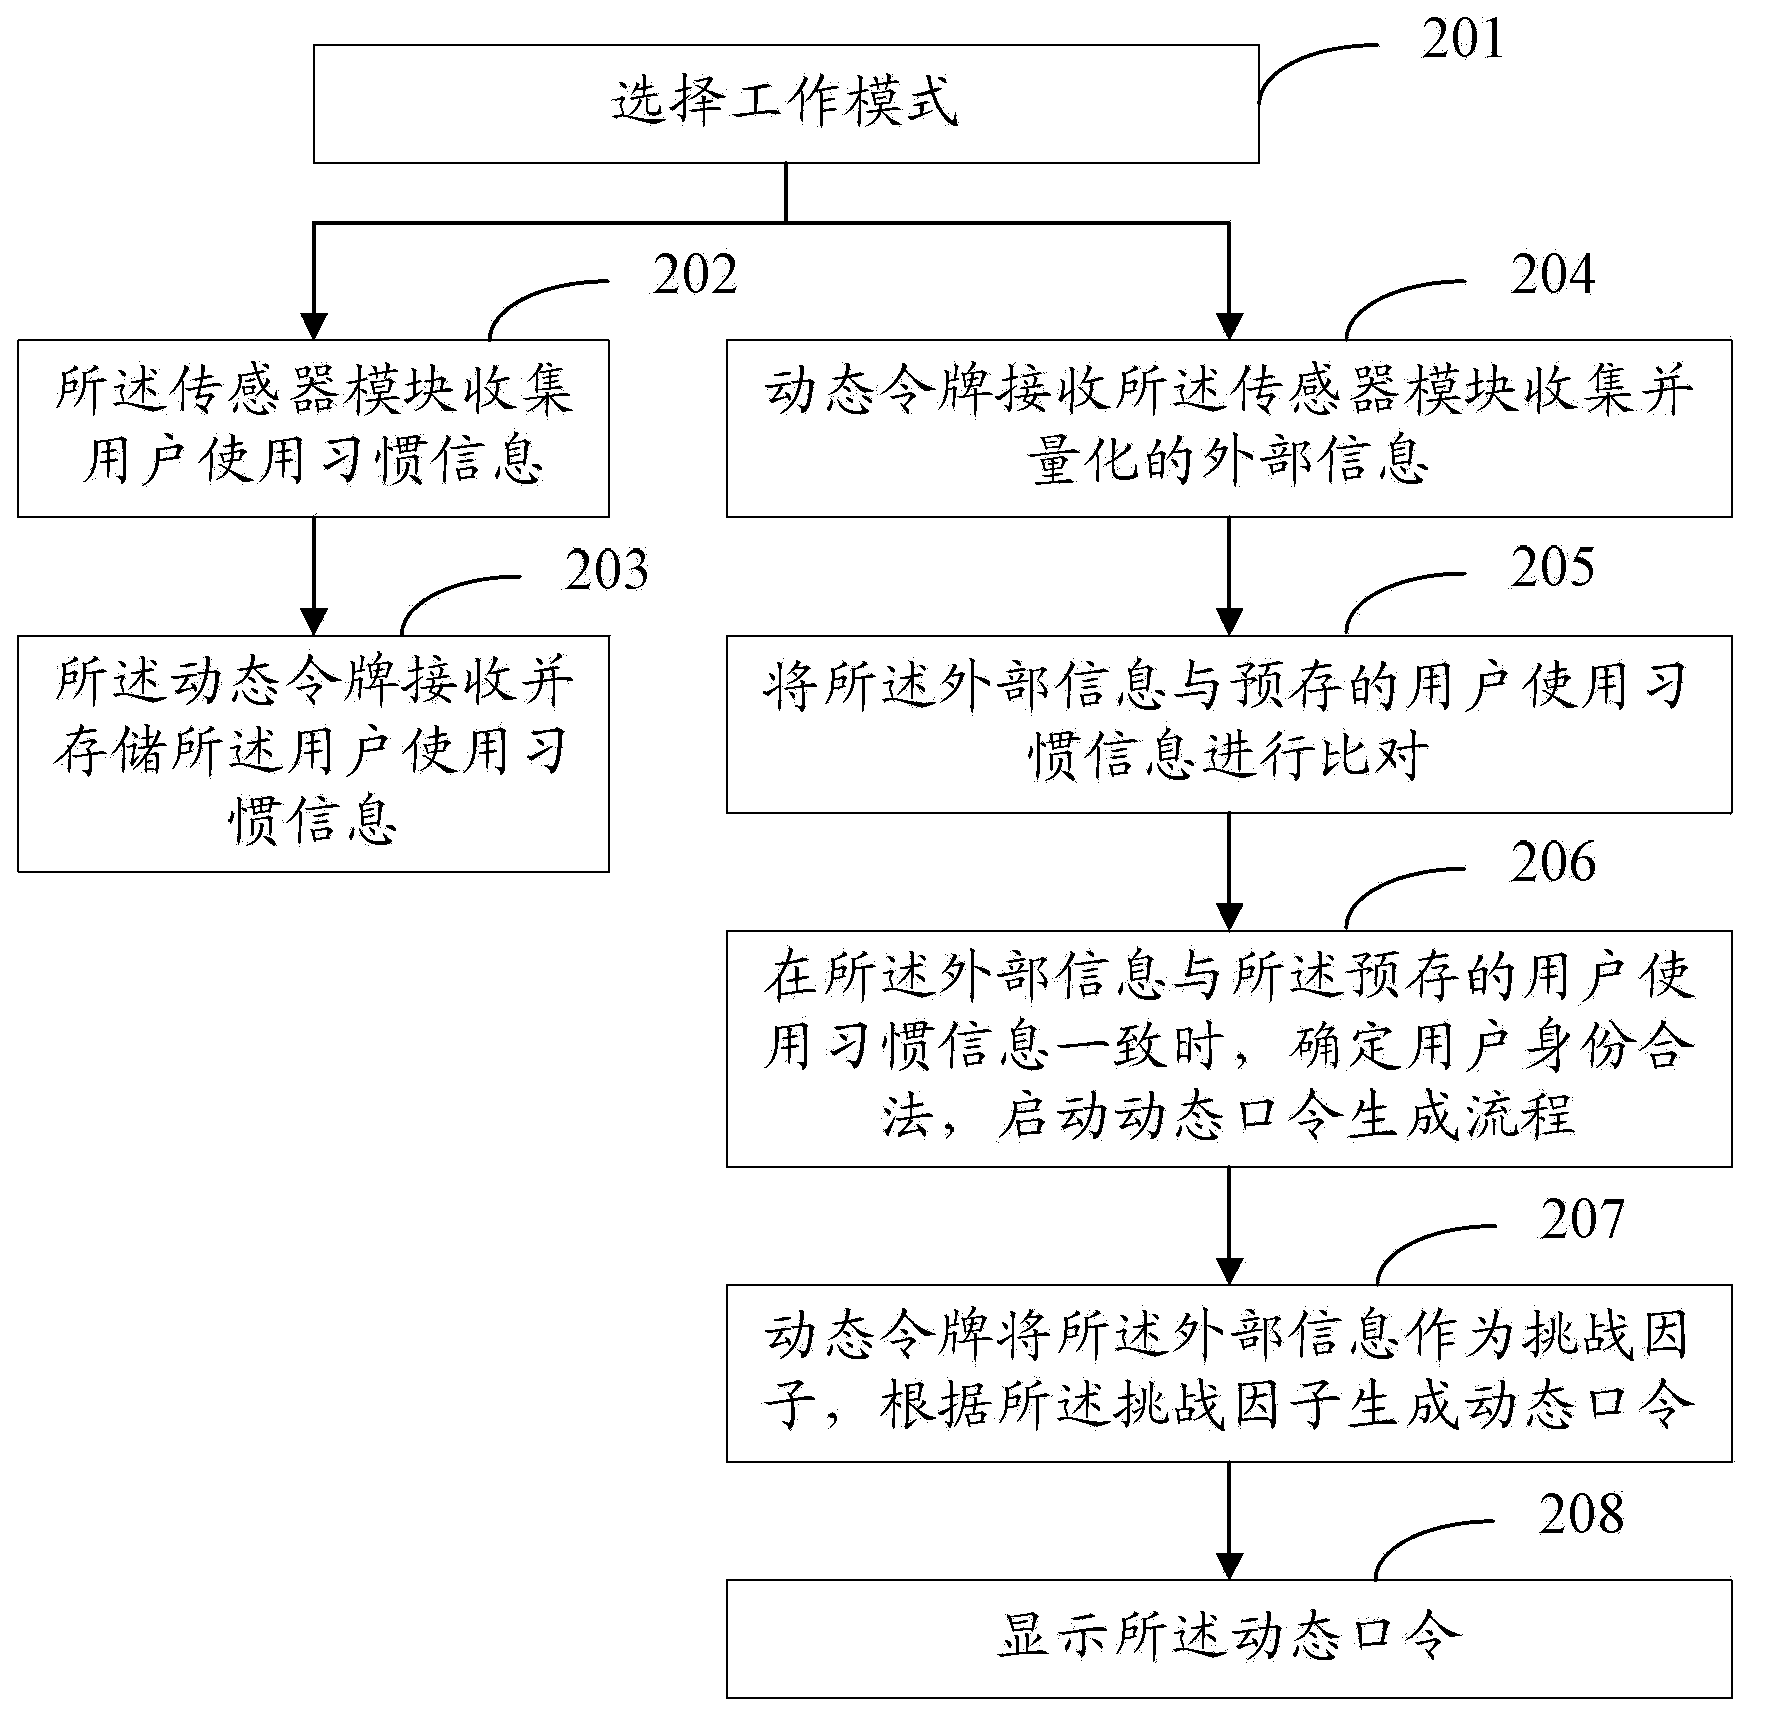 Dynamic password generation device and method